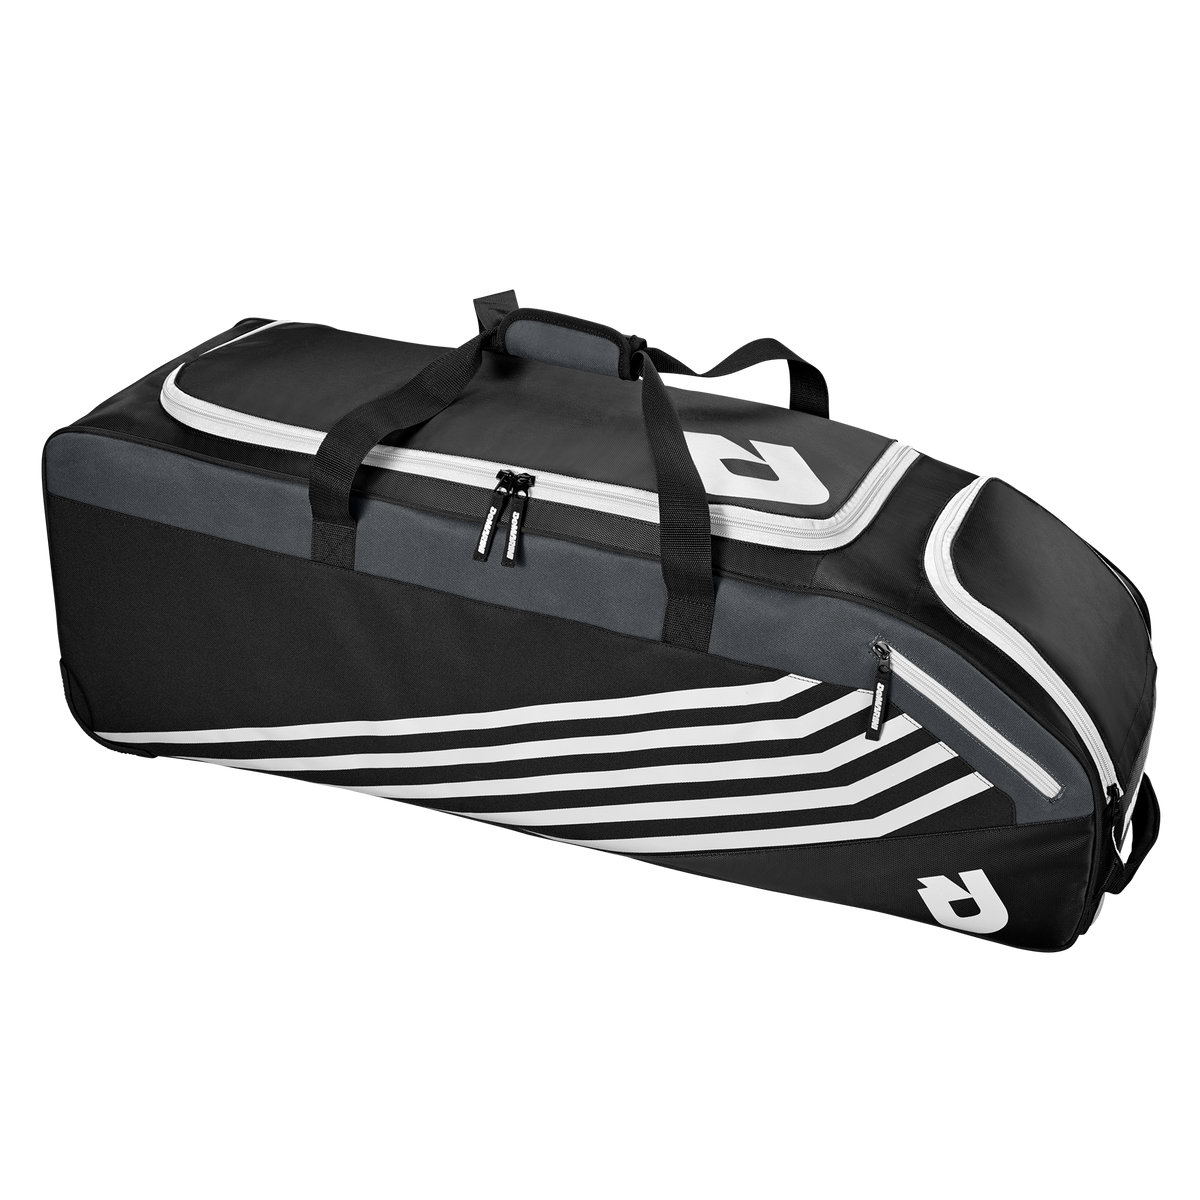 DeMarini Special Ops Front Line Roller Bag for Sale at Bats Plus